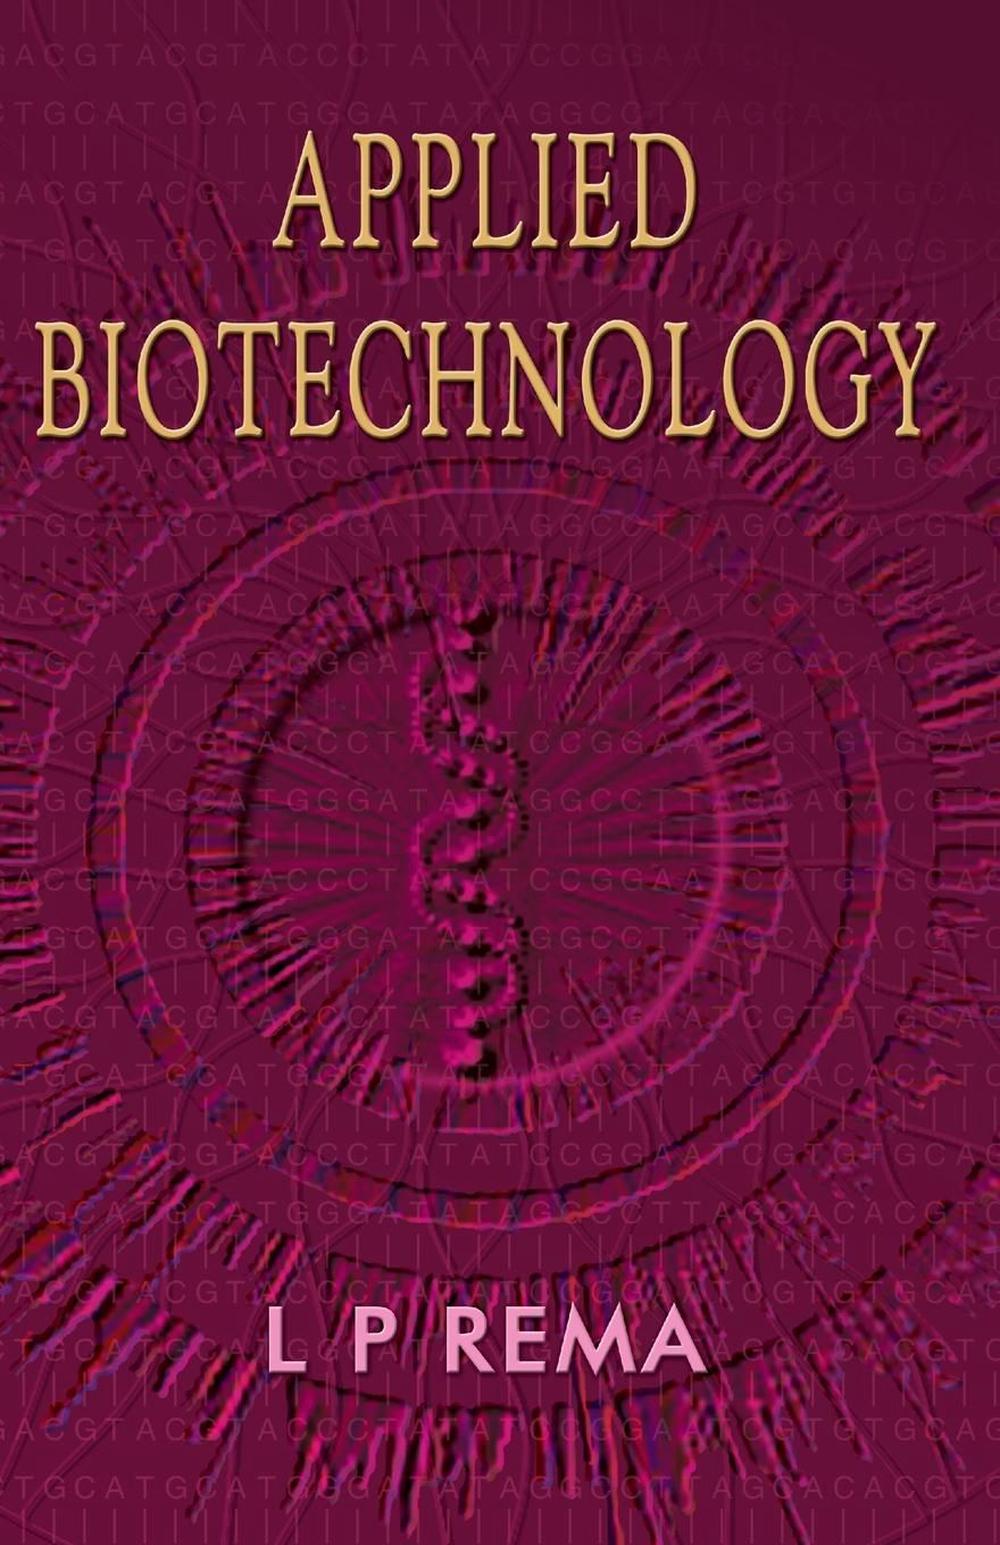 Applied Biotechnology by L.P. Rema (English) Paperback Book Free